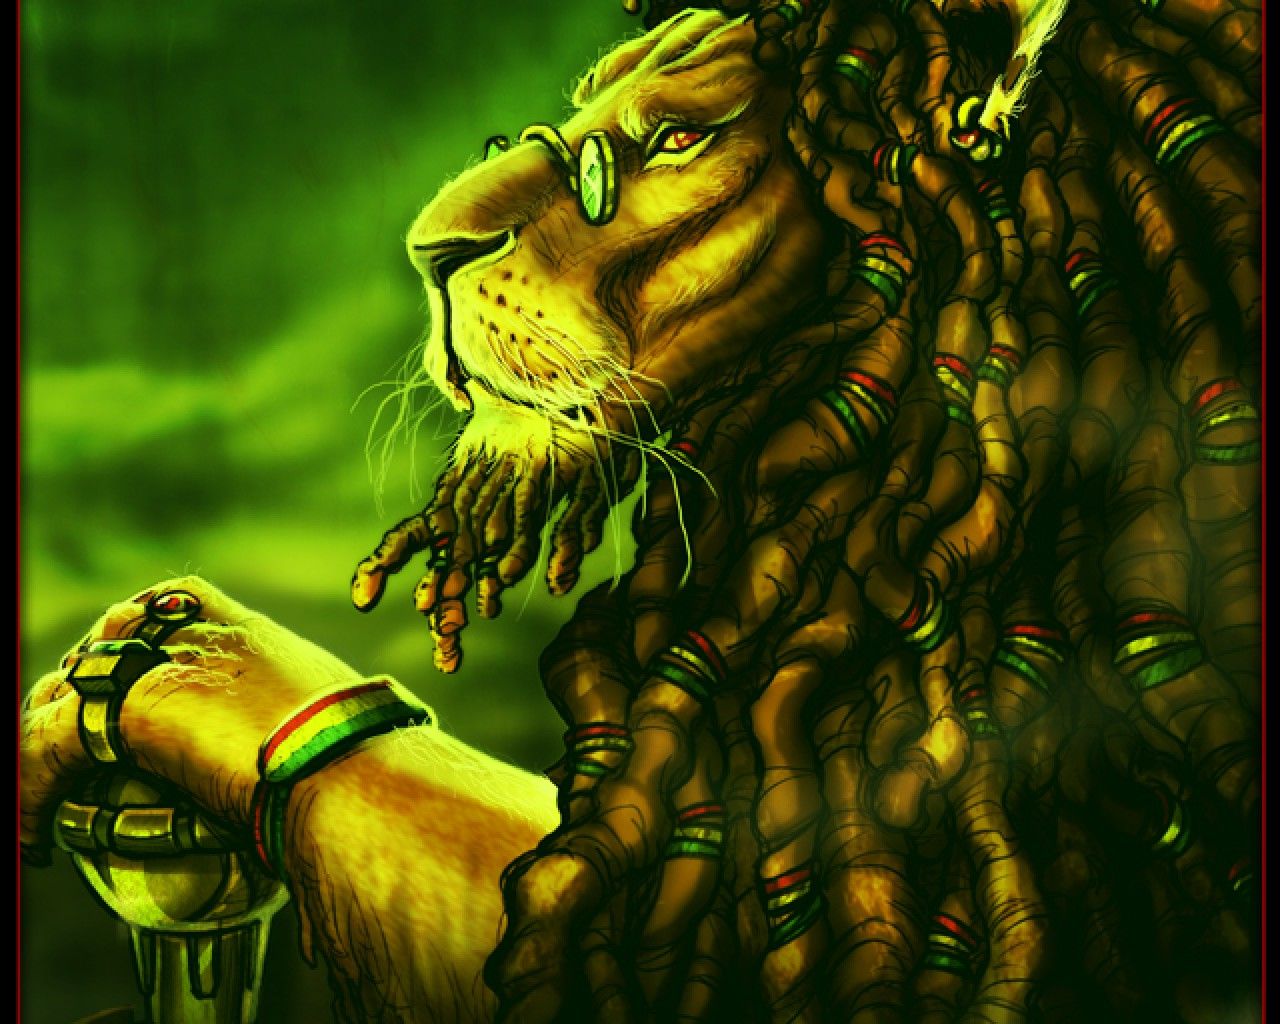 Rasta Weed Live Wallpaper Android Apps on Google Play 19201200